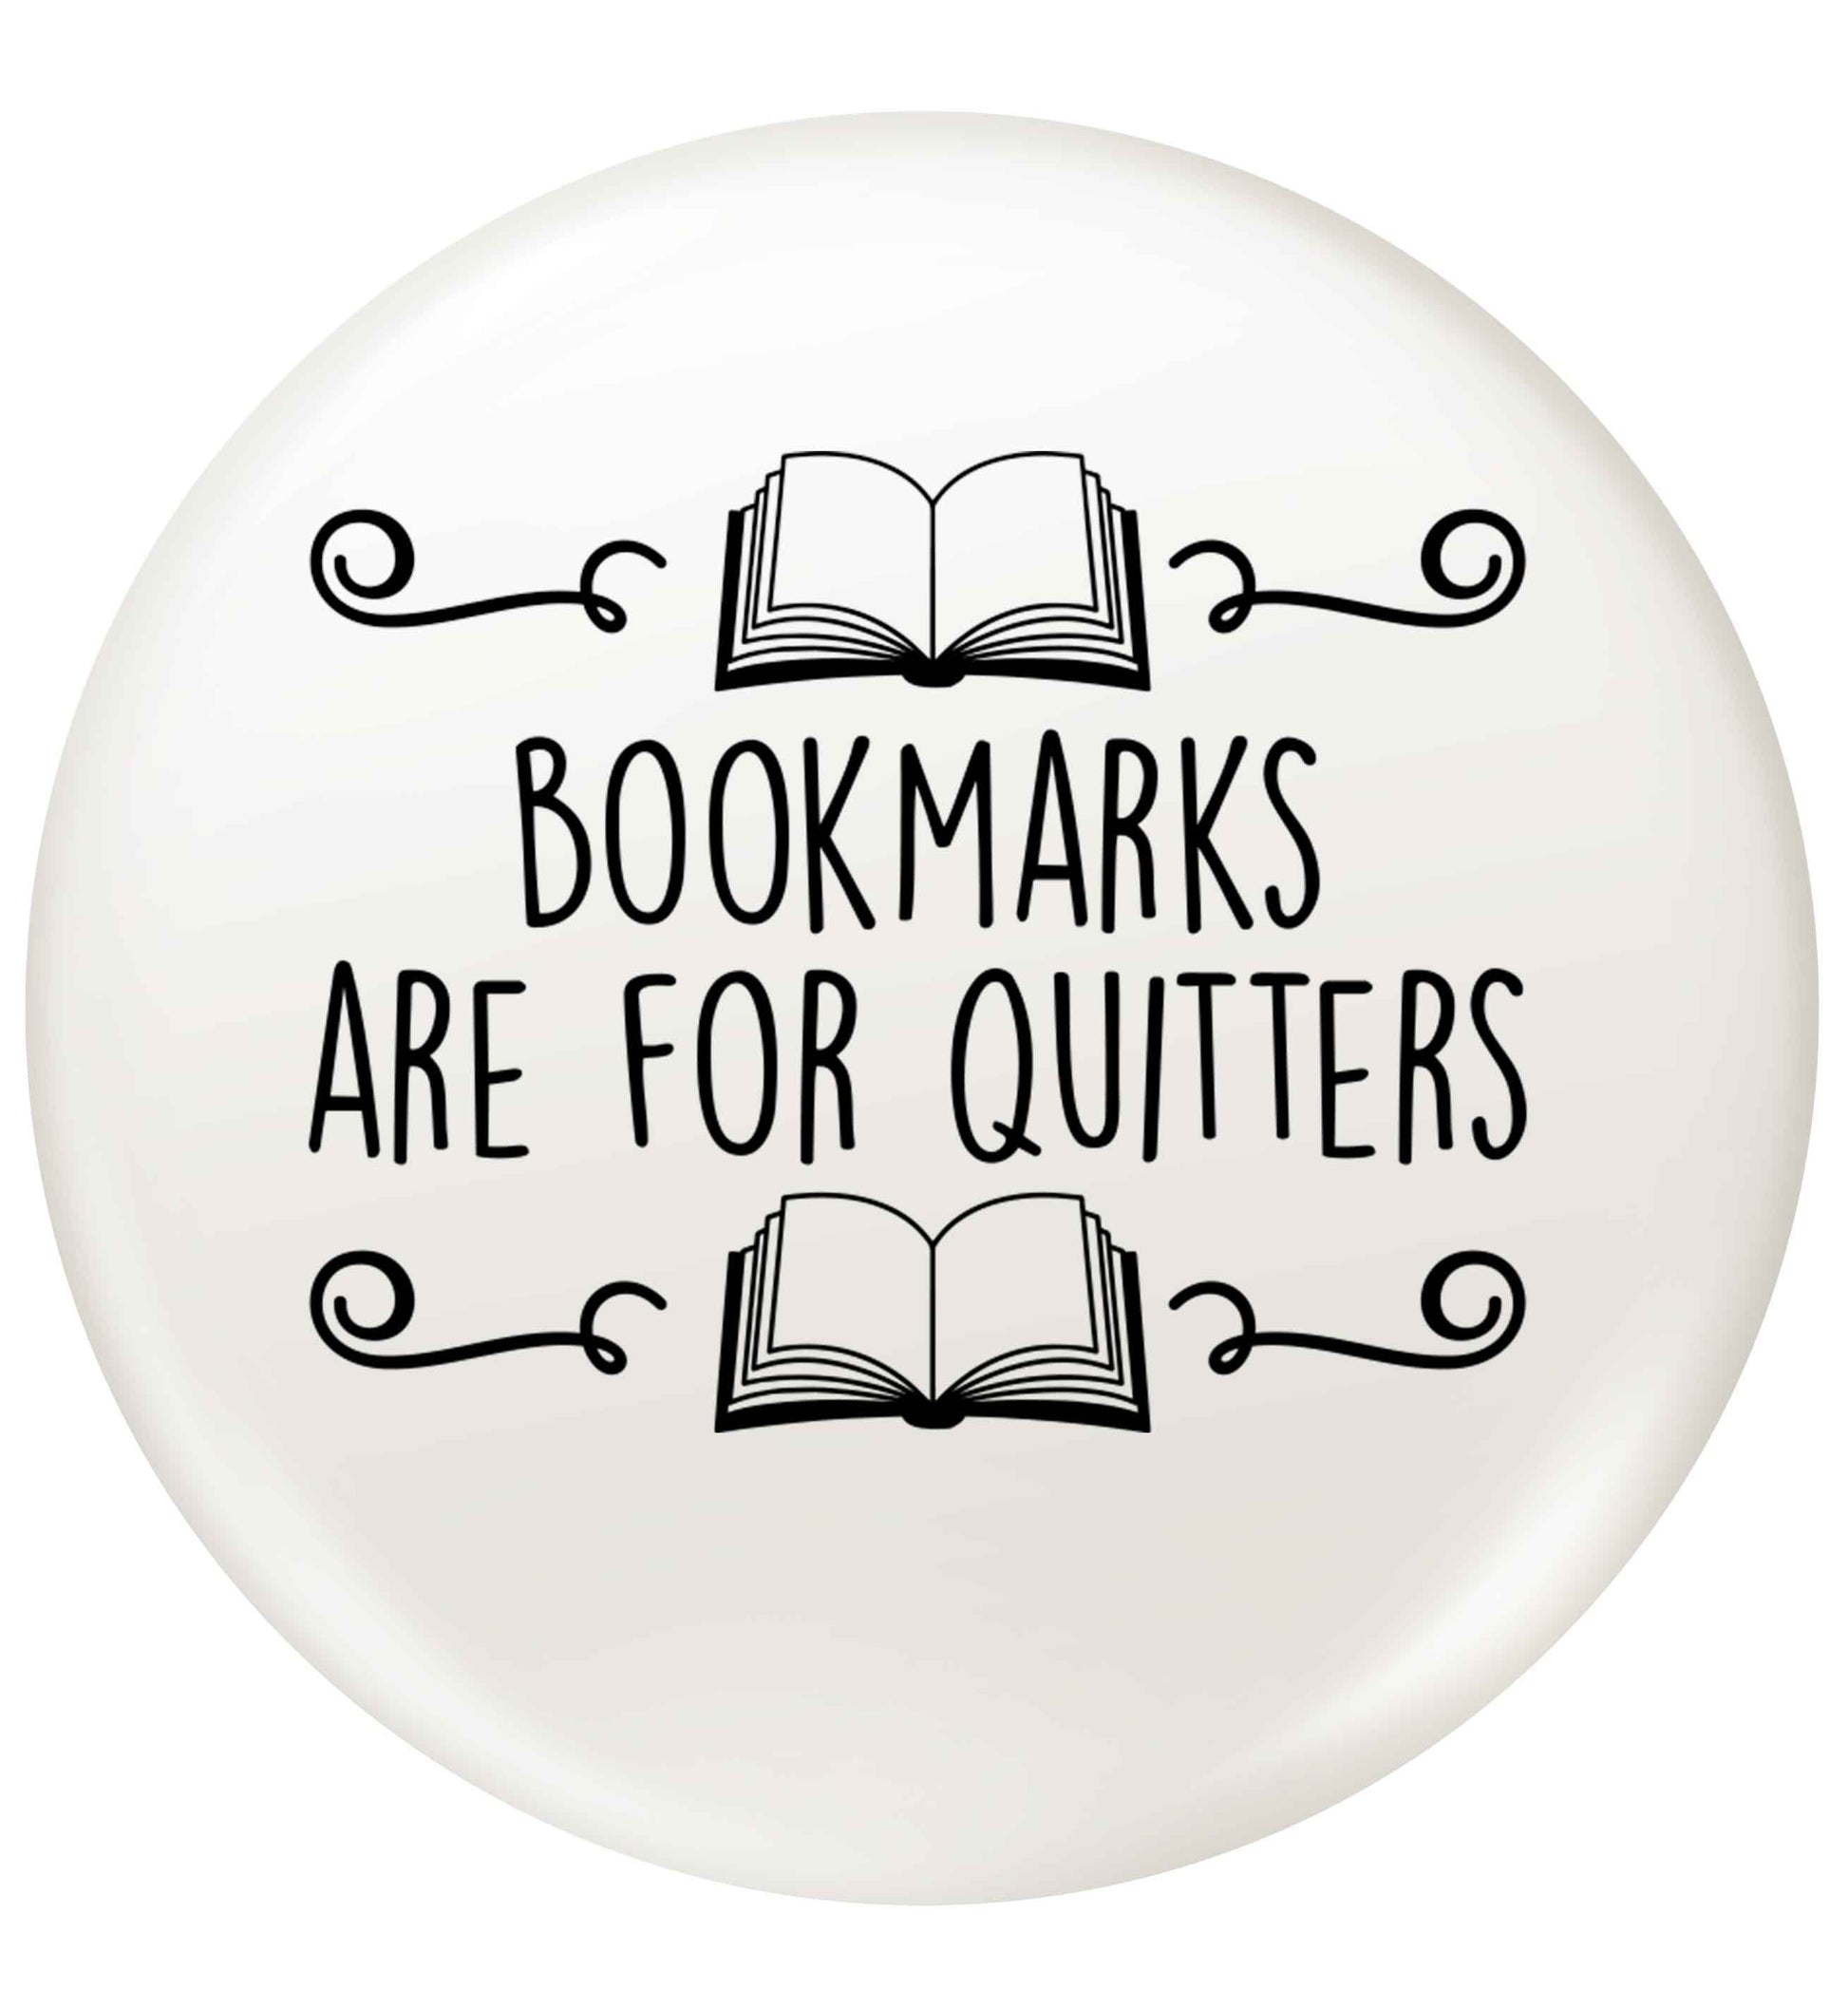 Bookmarks are for quitters small 25mm Pin badge